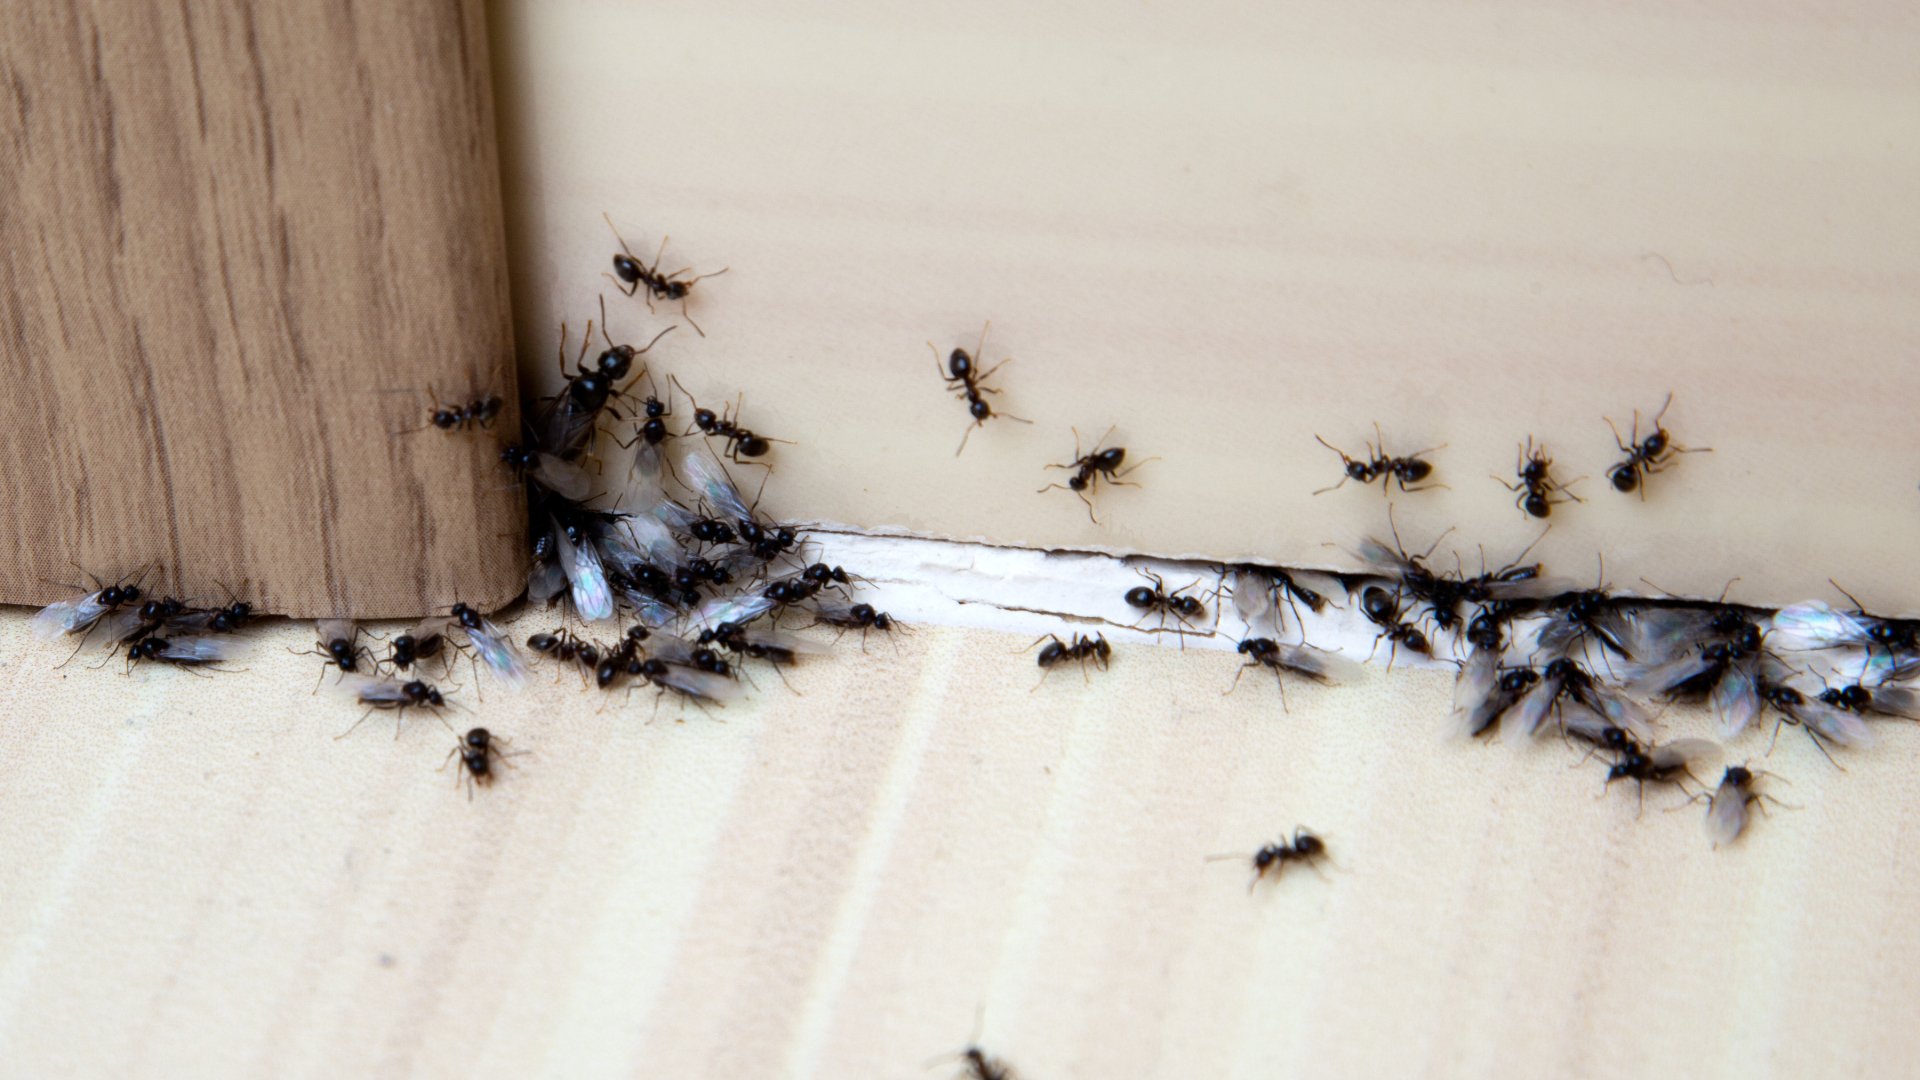 Are You Dealing With an Ant Infestation in Your Home? Here’s What to Do!